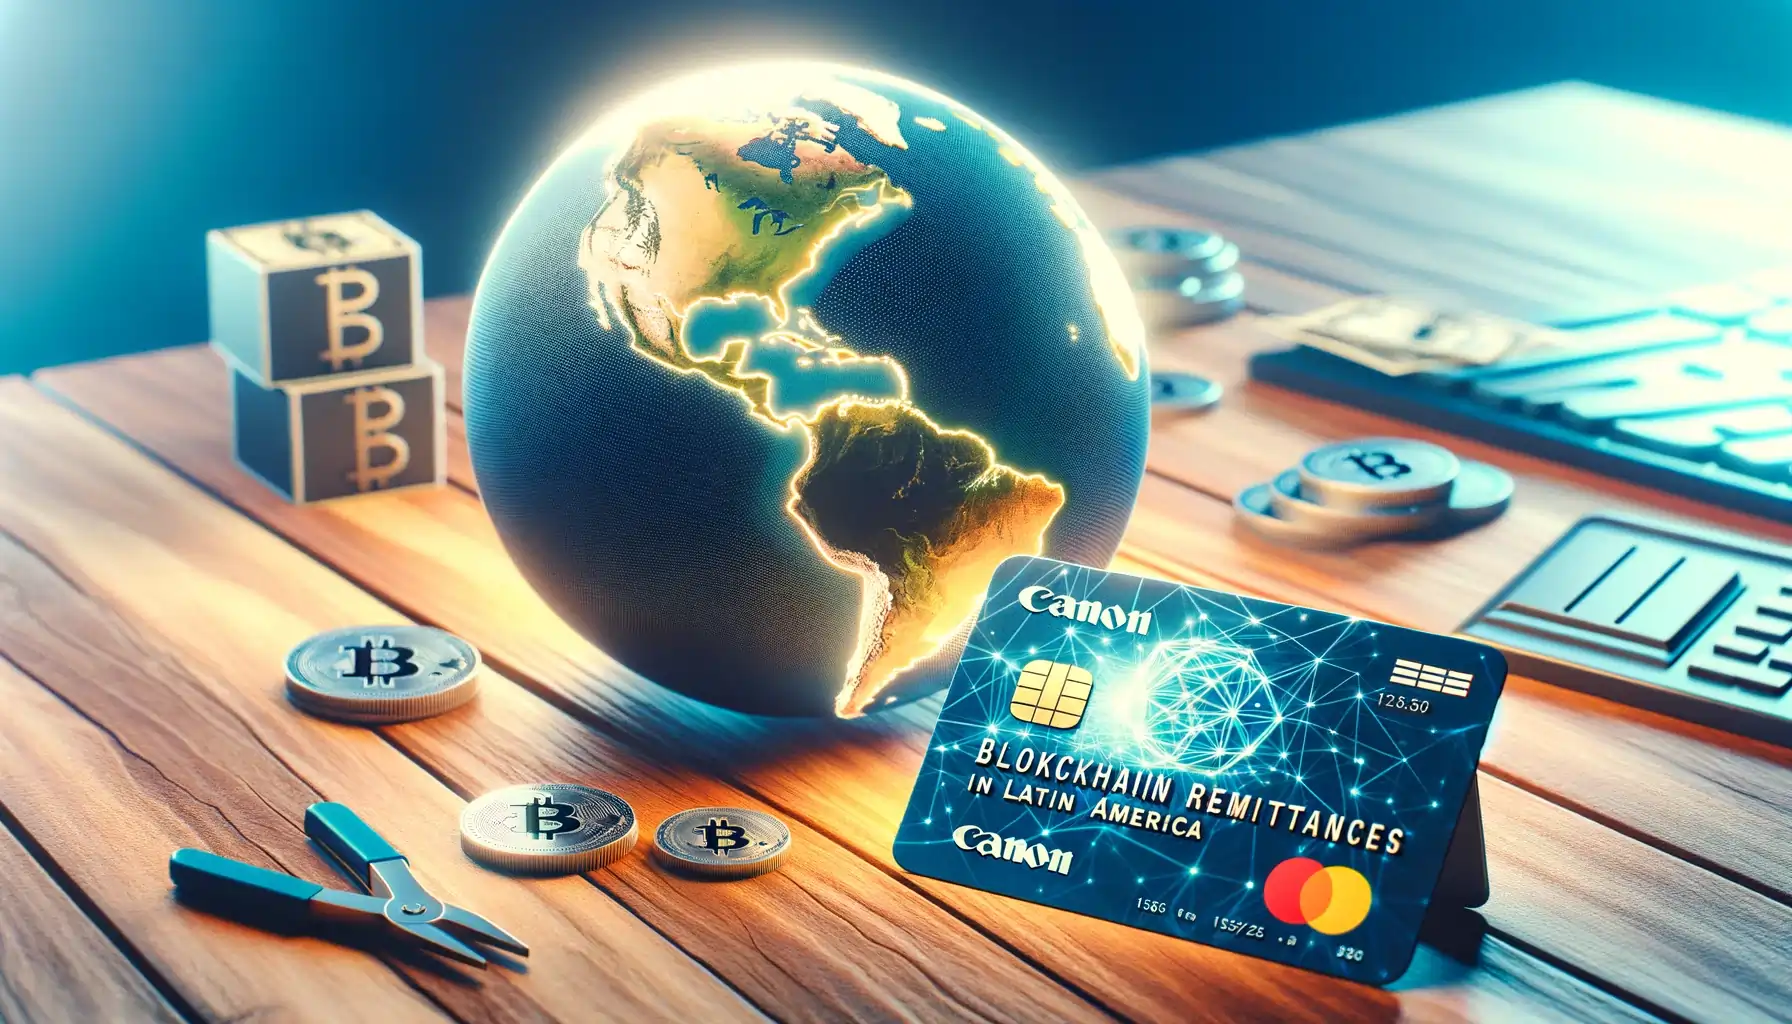 Mastercard Emphasizes Partnership Approach for Enhancing Blockchain Remittances in Latin America